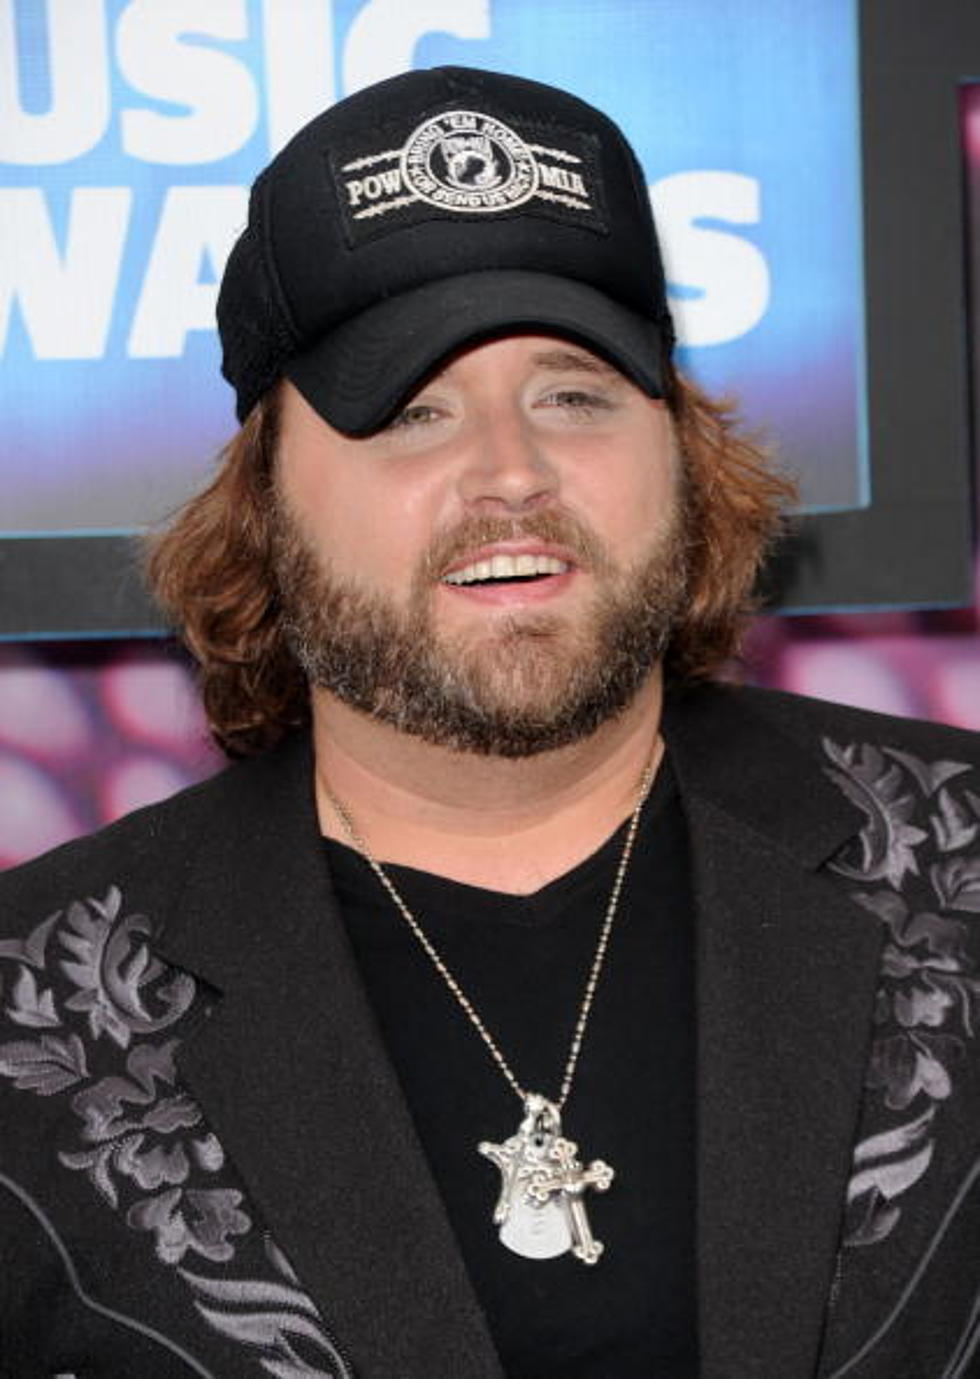 Randy Houser’s Brand New Song Comes From The Heart